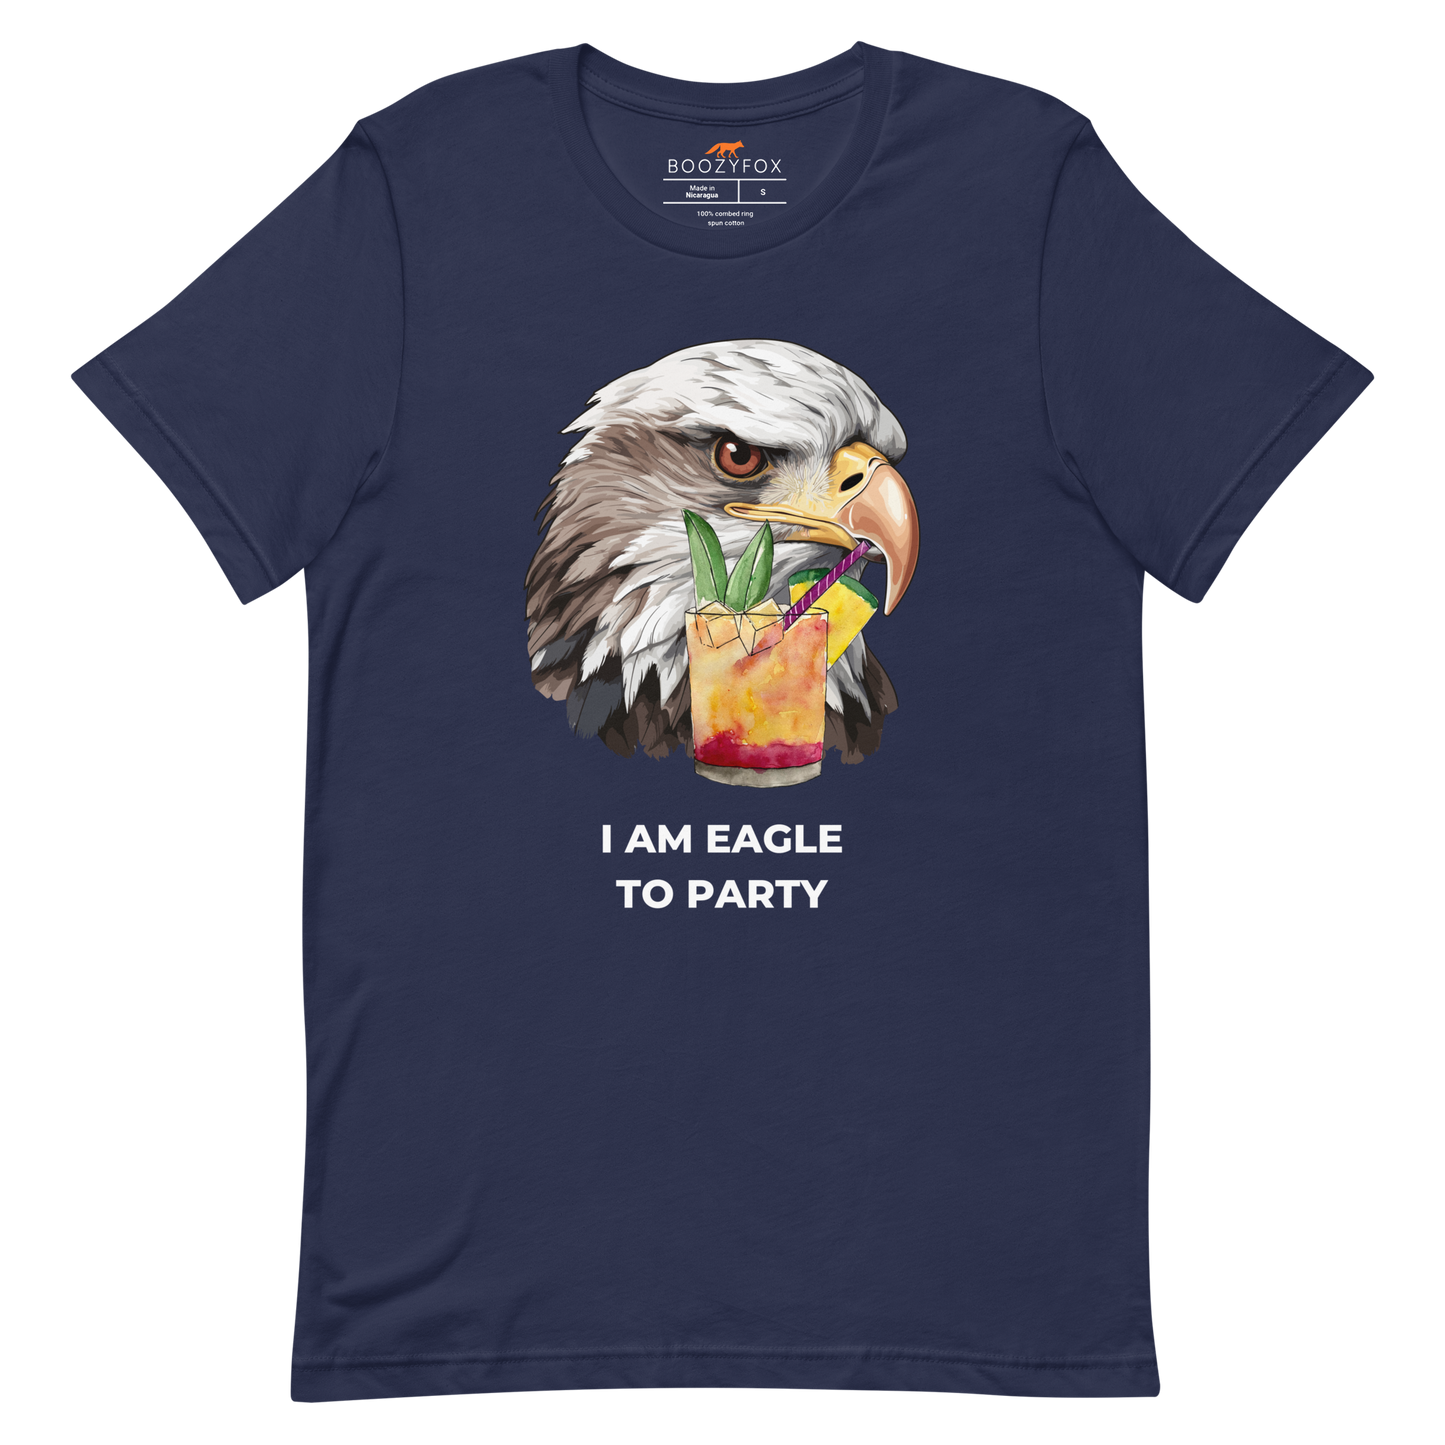 Navy Premium Eagle T-Shirt featuring an eye-catching I Am Eagle to Party graphic on the chest - Funny Graphic Eagle Tees - Boozy Fox